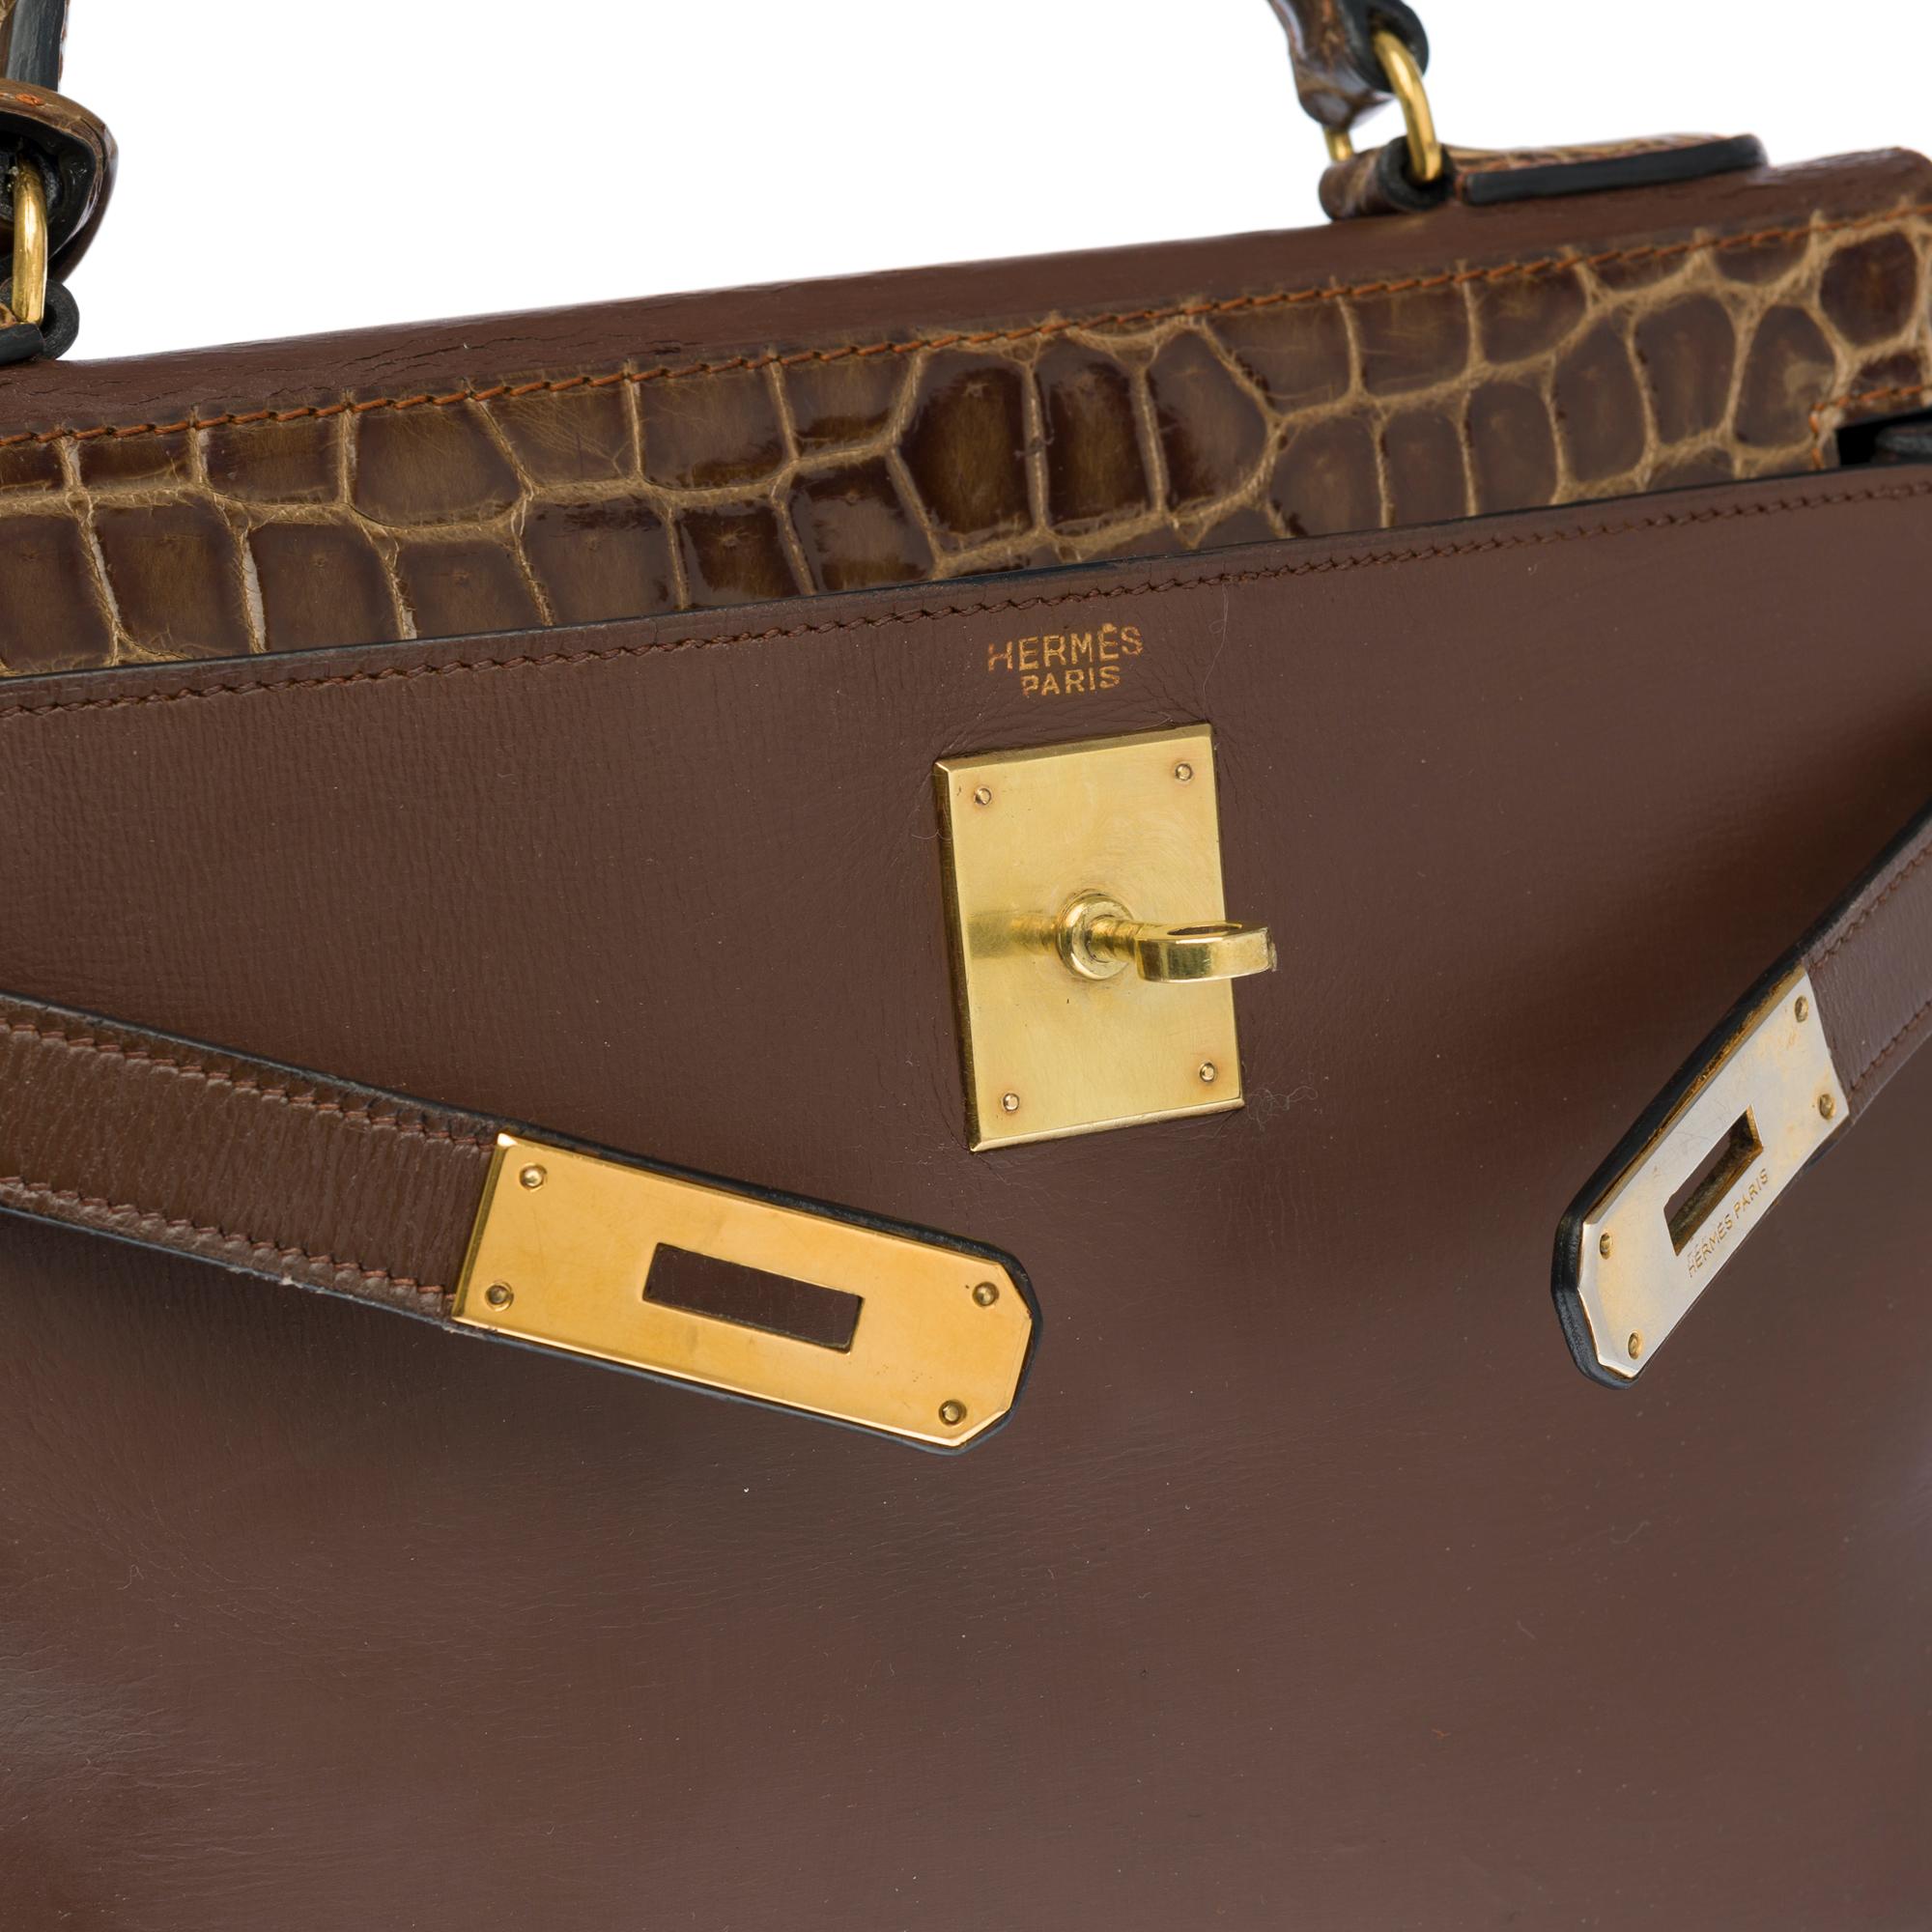 Customized Hermès Kelly 28 in brown calfskin strap with brown Crocodile, GHW  1